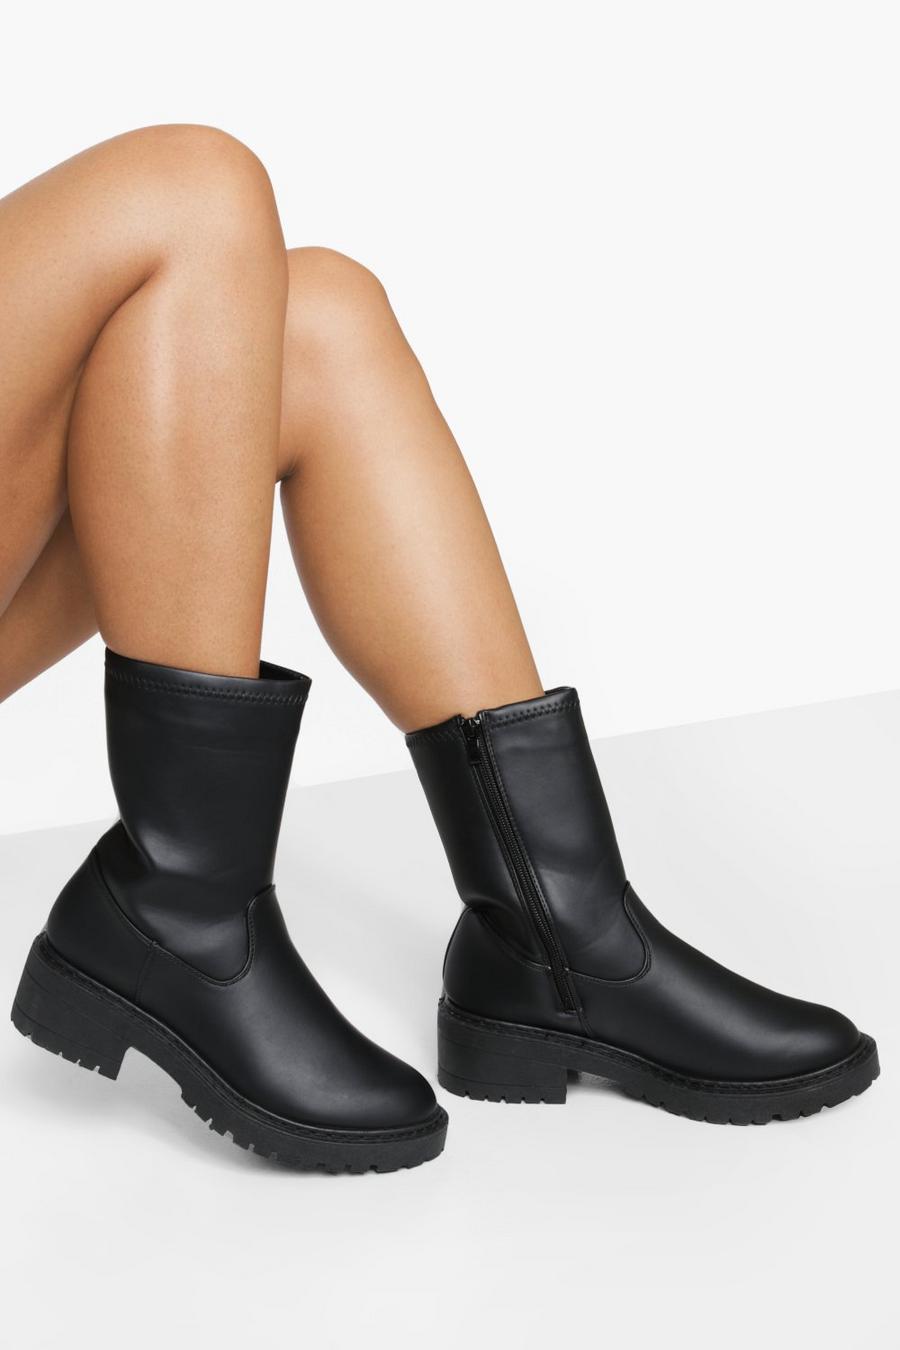 Black Wide Fit Chunky Calf High Boots